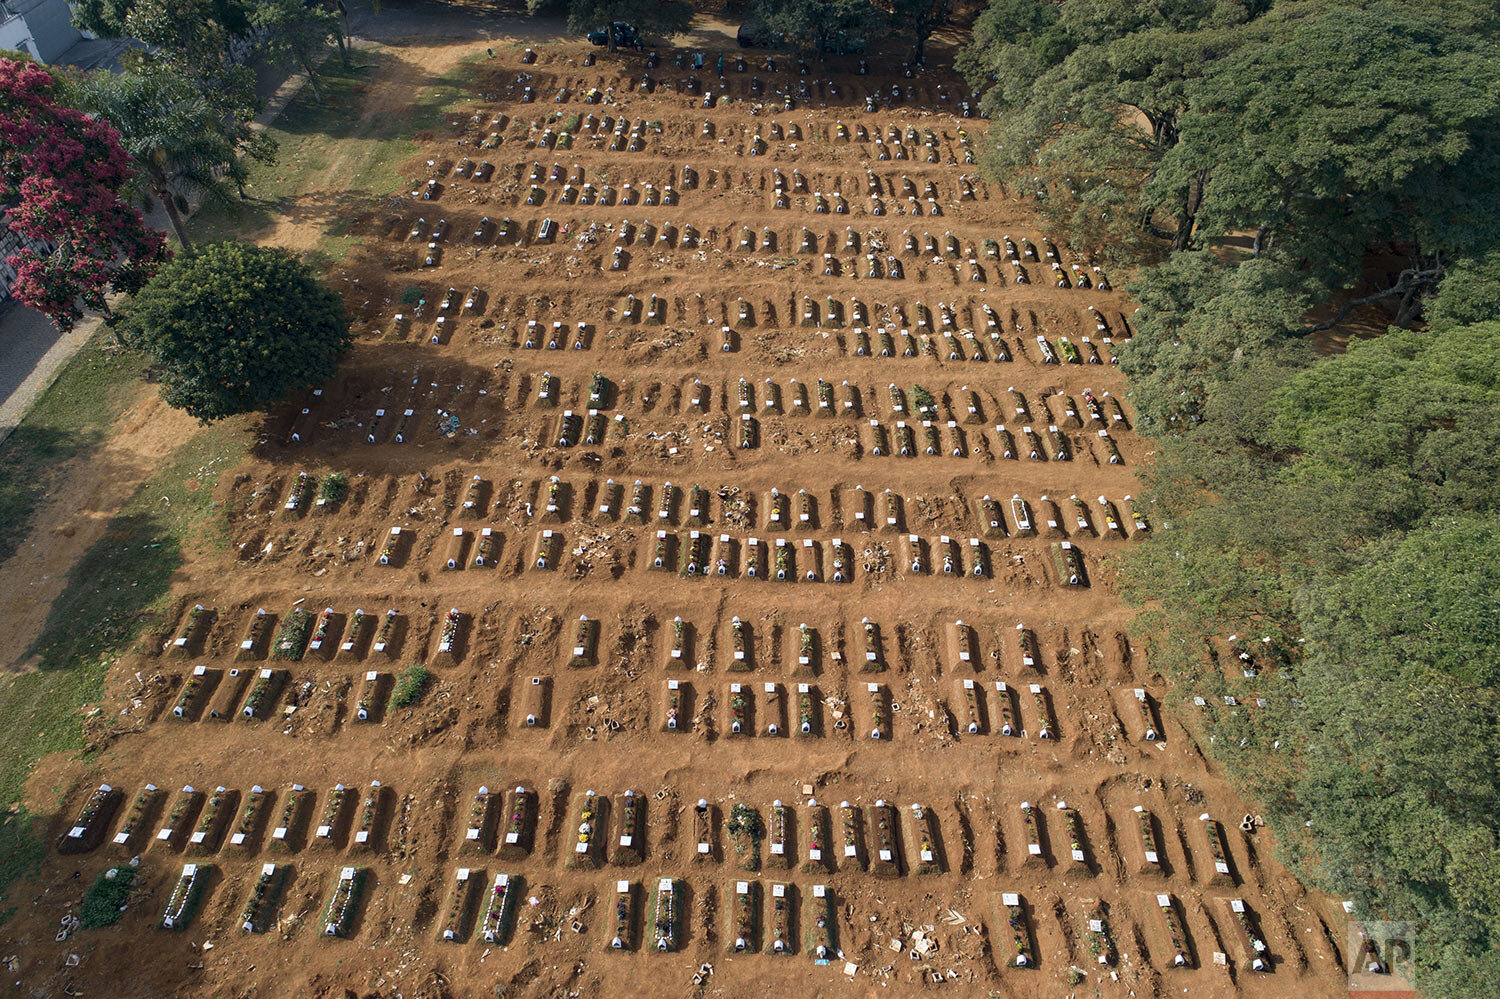  The graves of those who have died during the previous weeks fill the Vila Formosa cemetery, during the new coronavirus pandemic in Sao Paulo, Brazil, Thursday, April 30, 2020. (AP Photo/Andre Penner) 